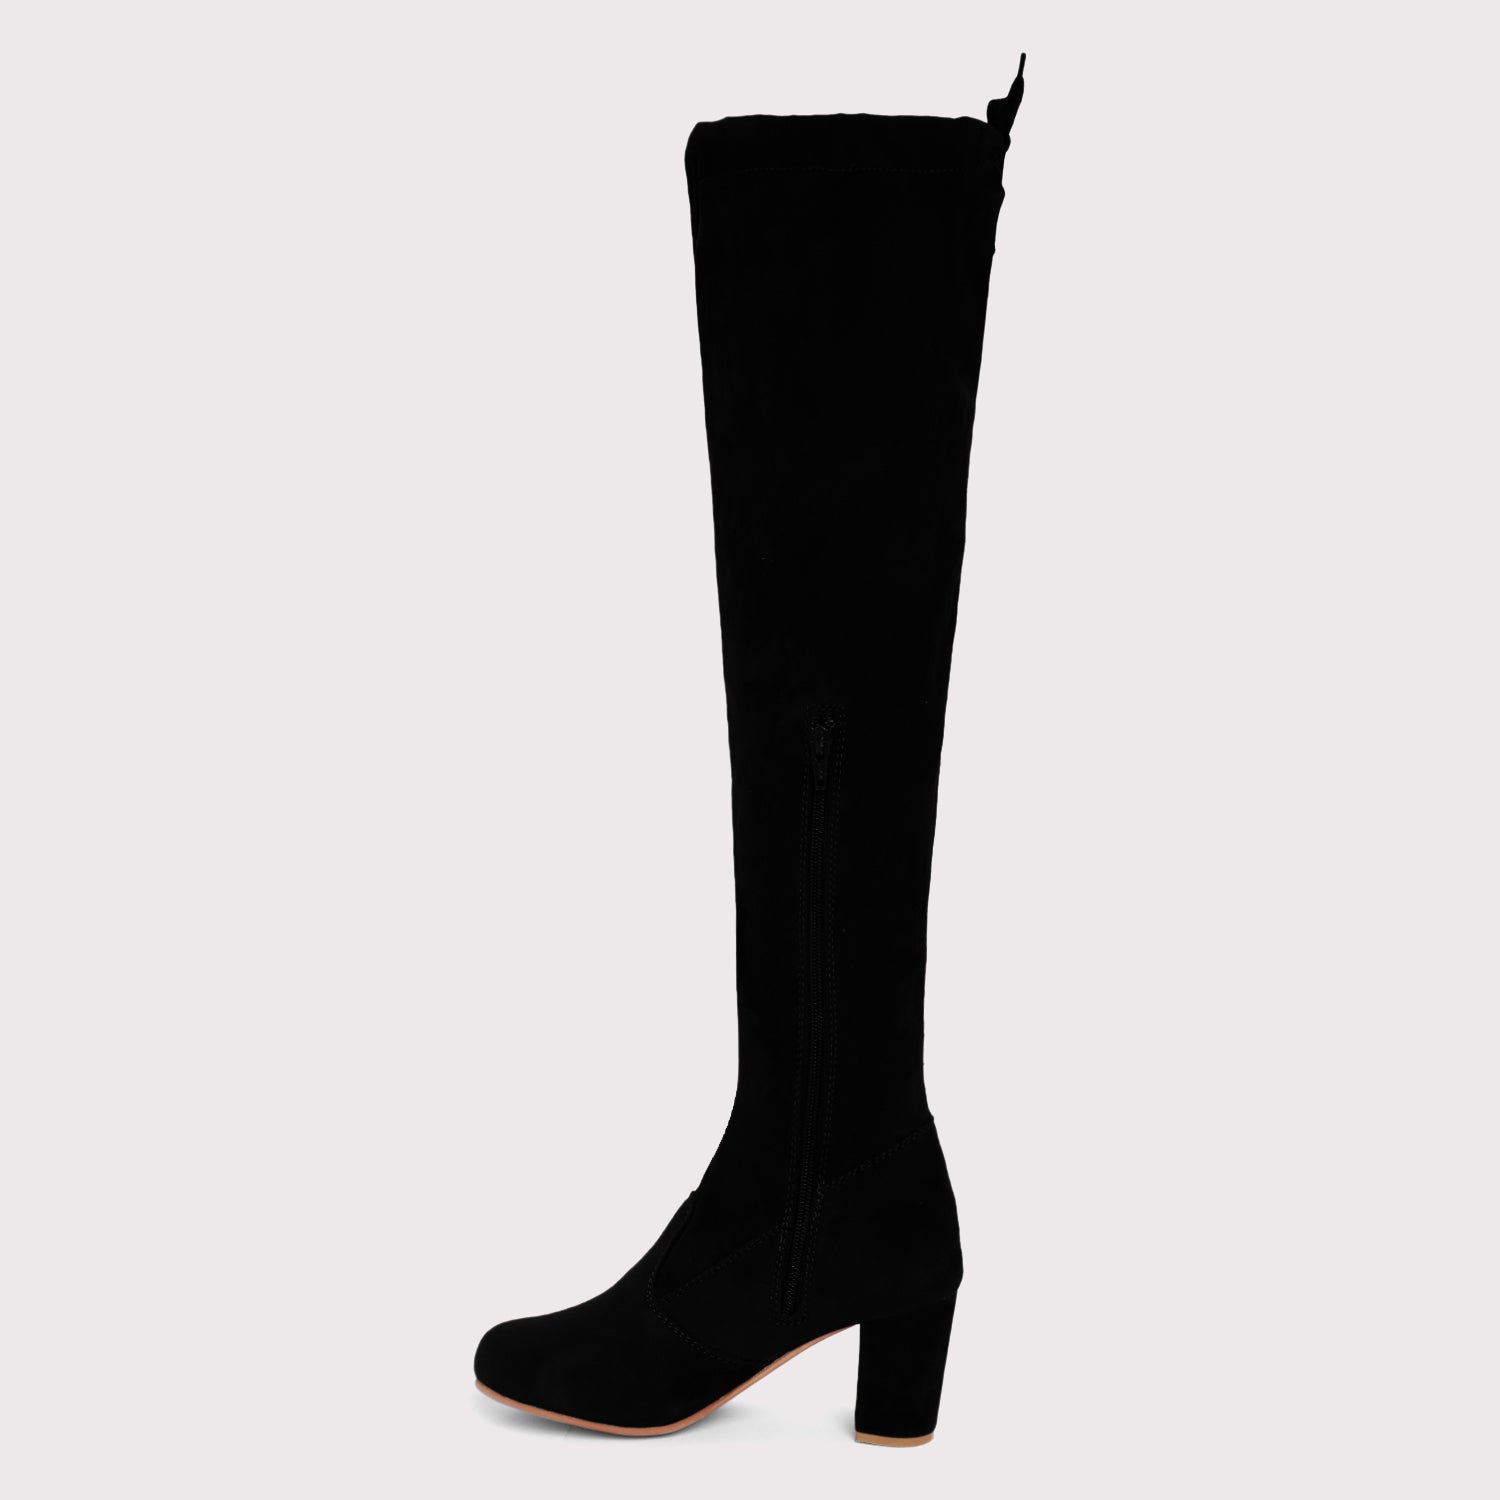 SAINT LAURENT Diane buckled glossed-leather knee boots | NET-A-PORTER